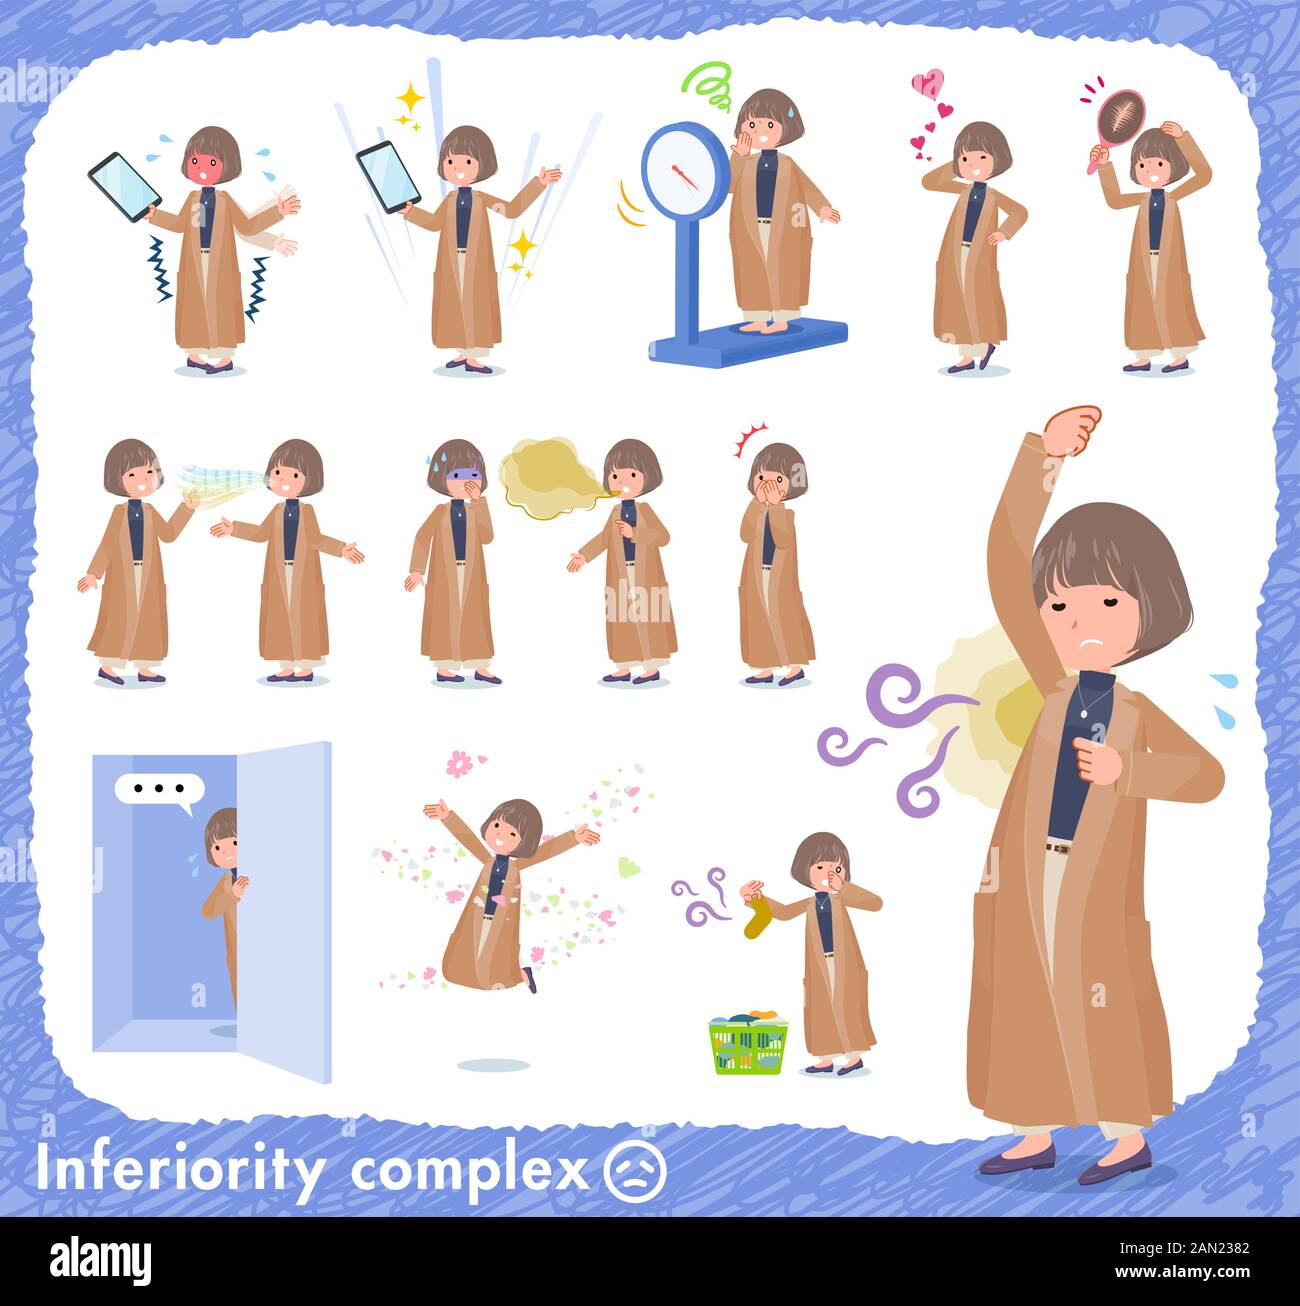 A set of casual fashion women on inferiority complex.There are actions suffering from smell and appearance.It's vector art so it's easy to edit. Stock Vector